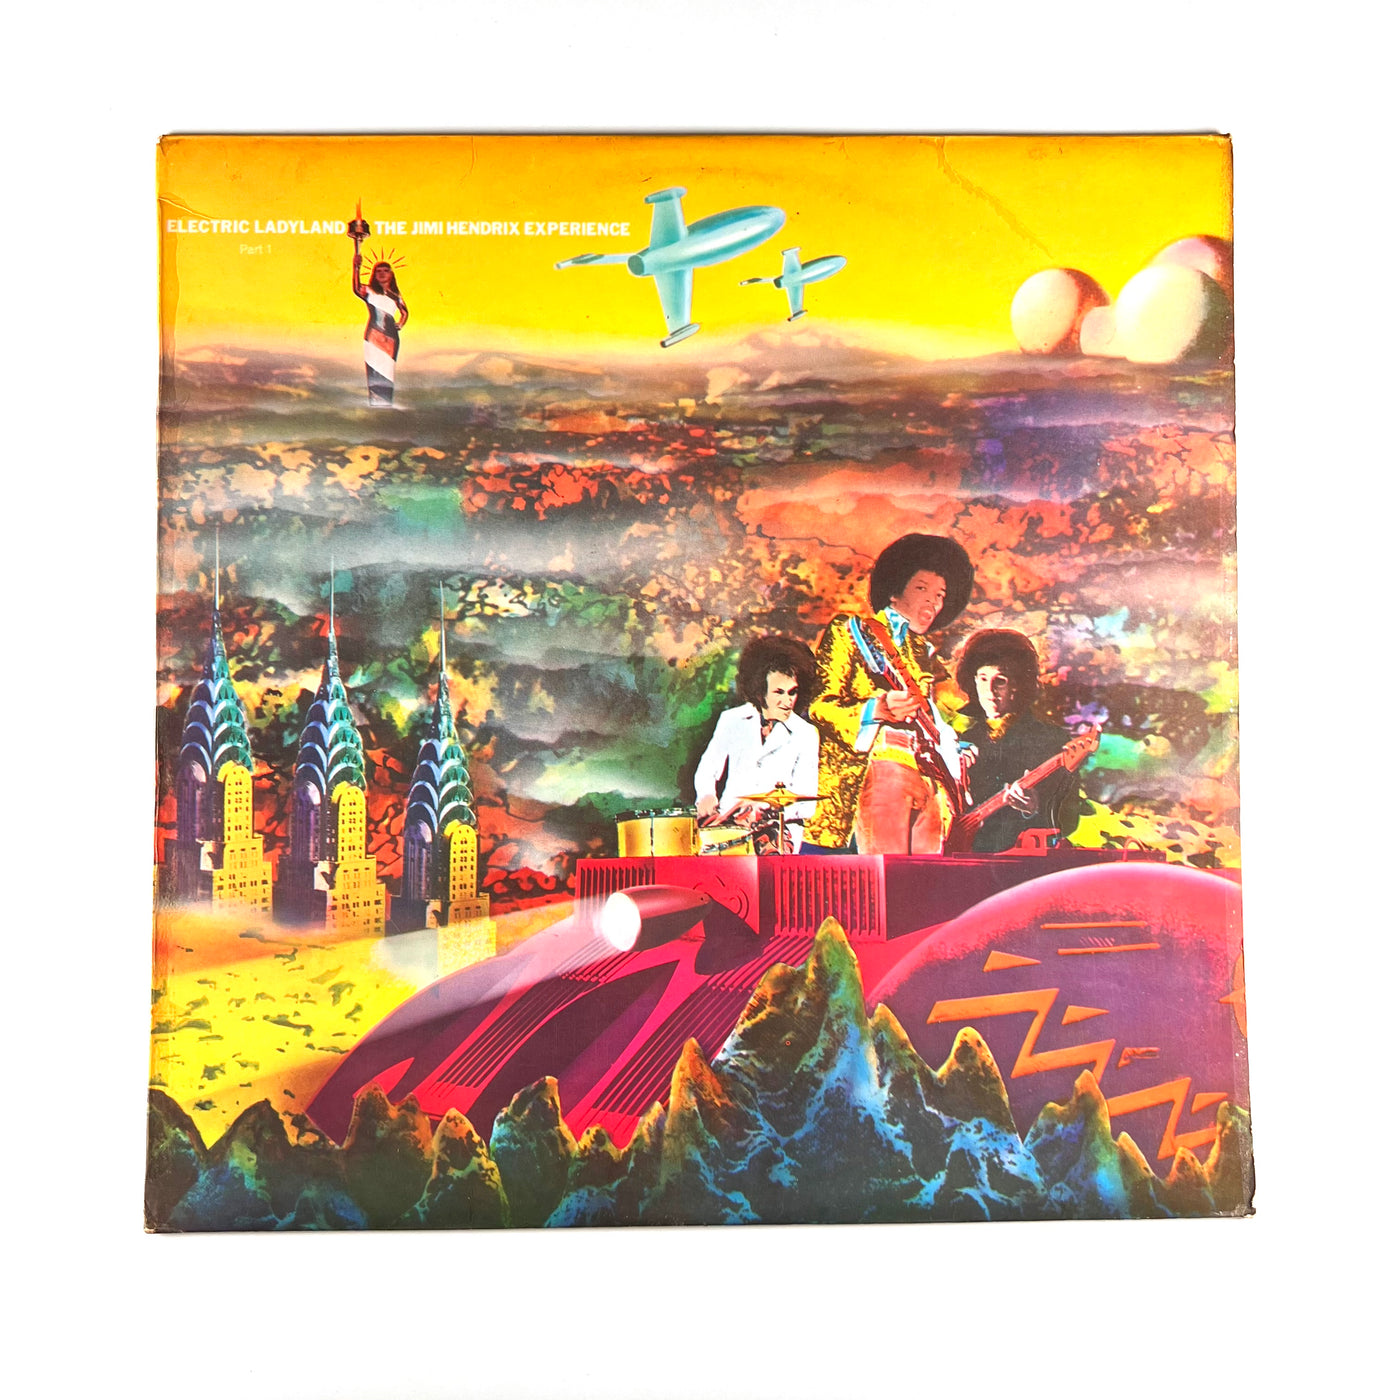 The Jimi Hendrix Experience - Electric Ladyland Part 1